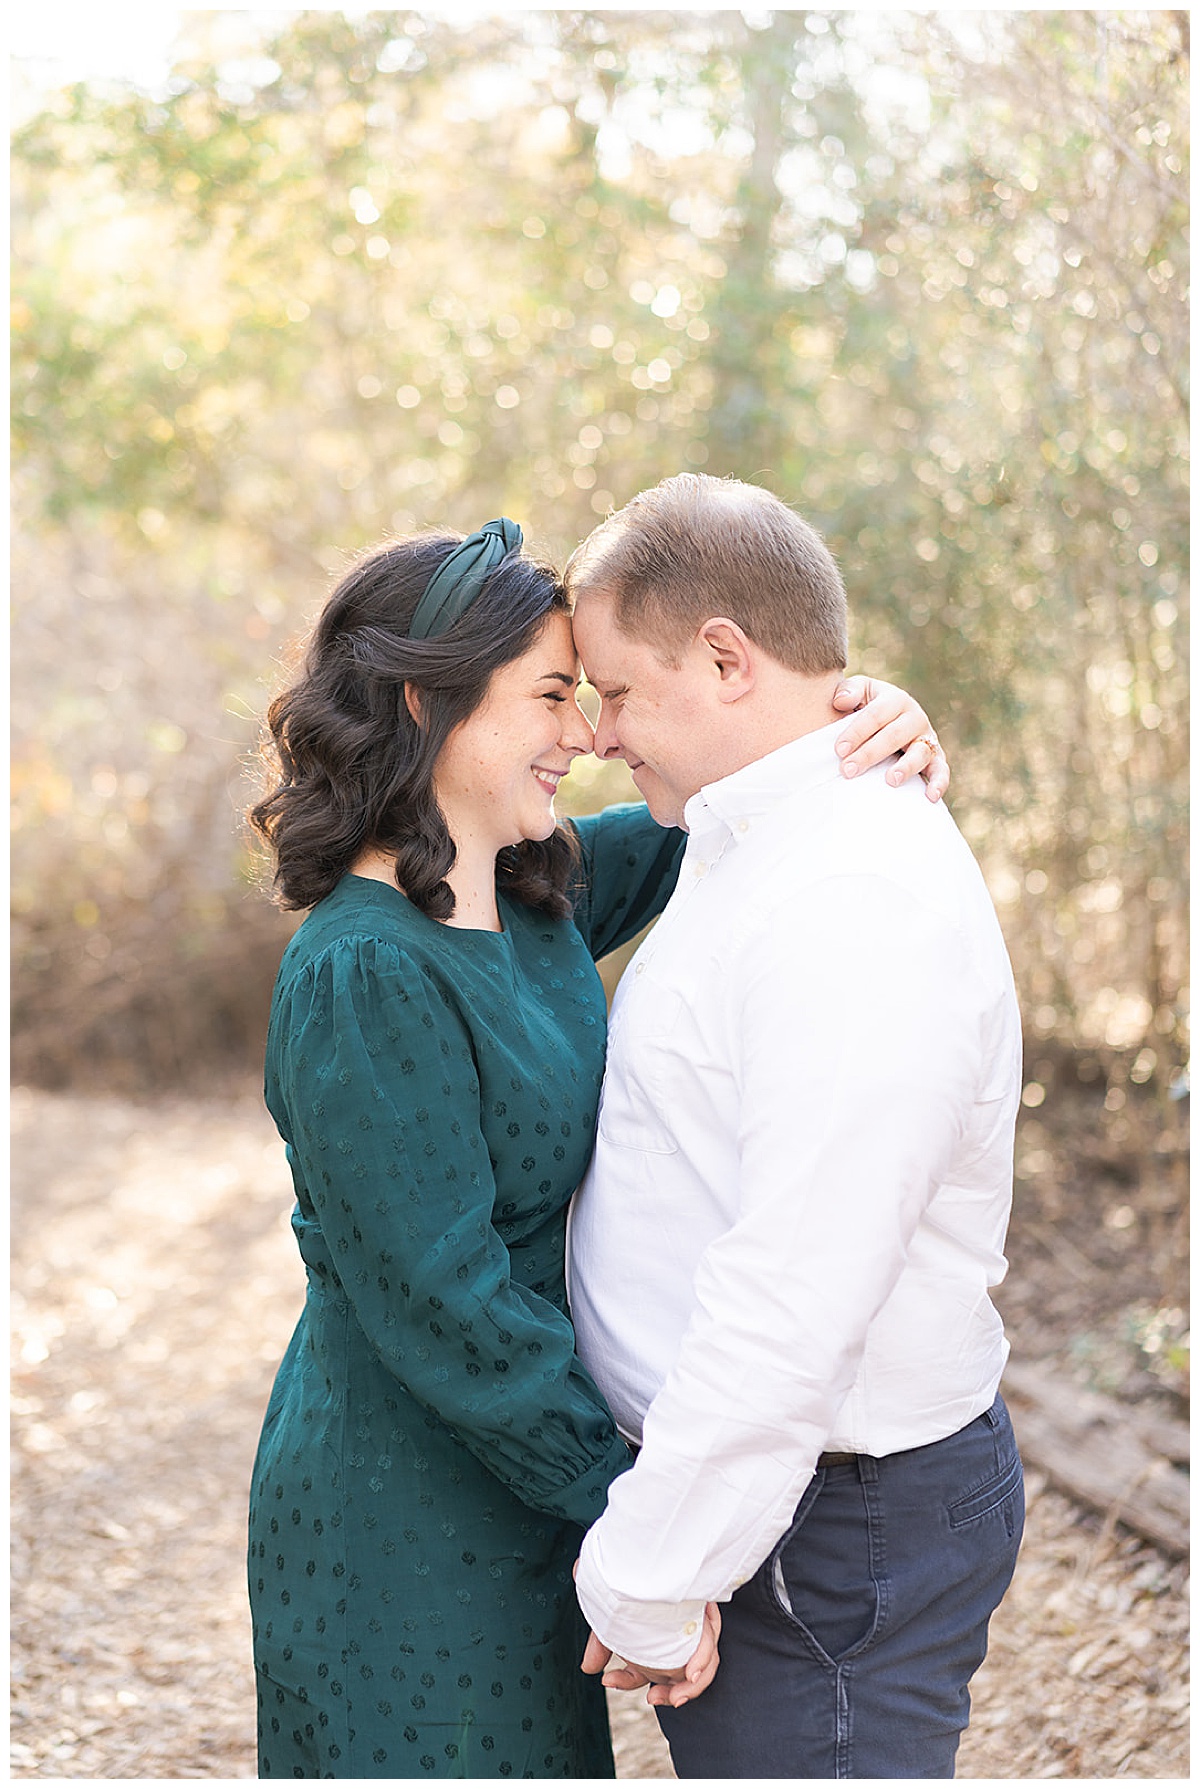 Man and woman smile together after Ninfa’s Engagement Session